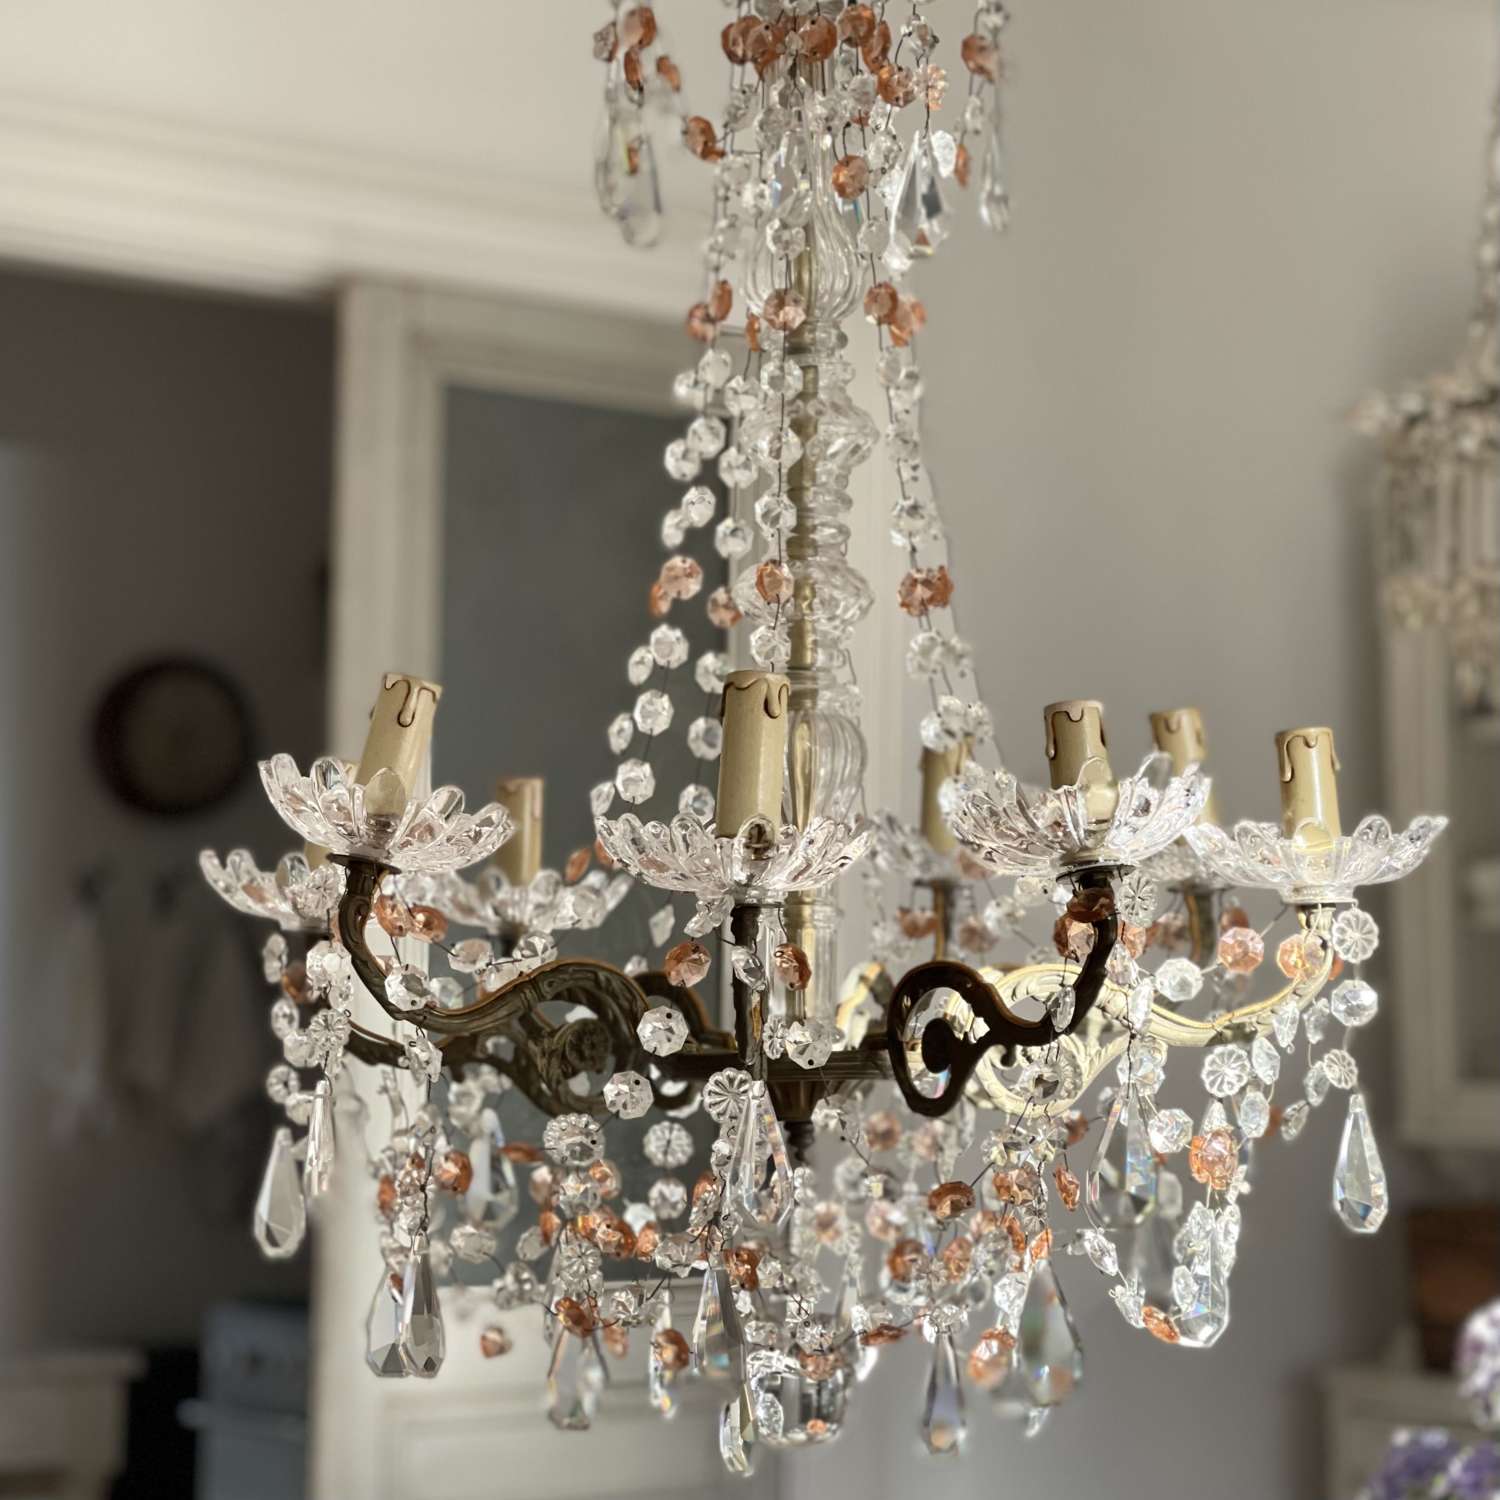 Antique French crystal chandelier - rewired